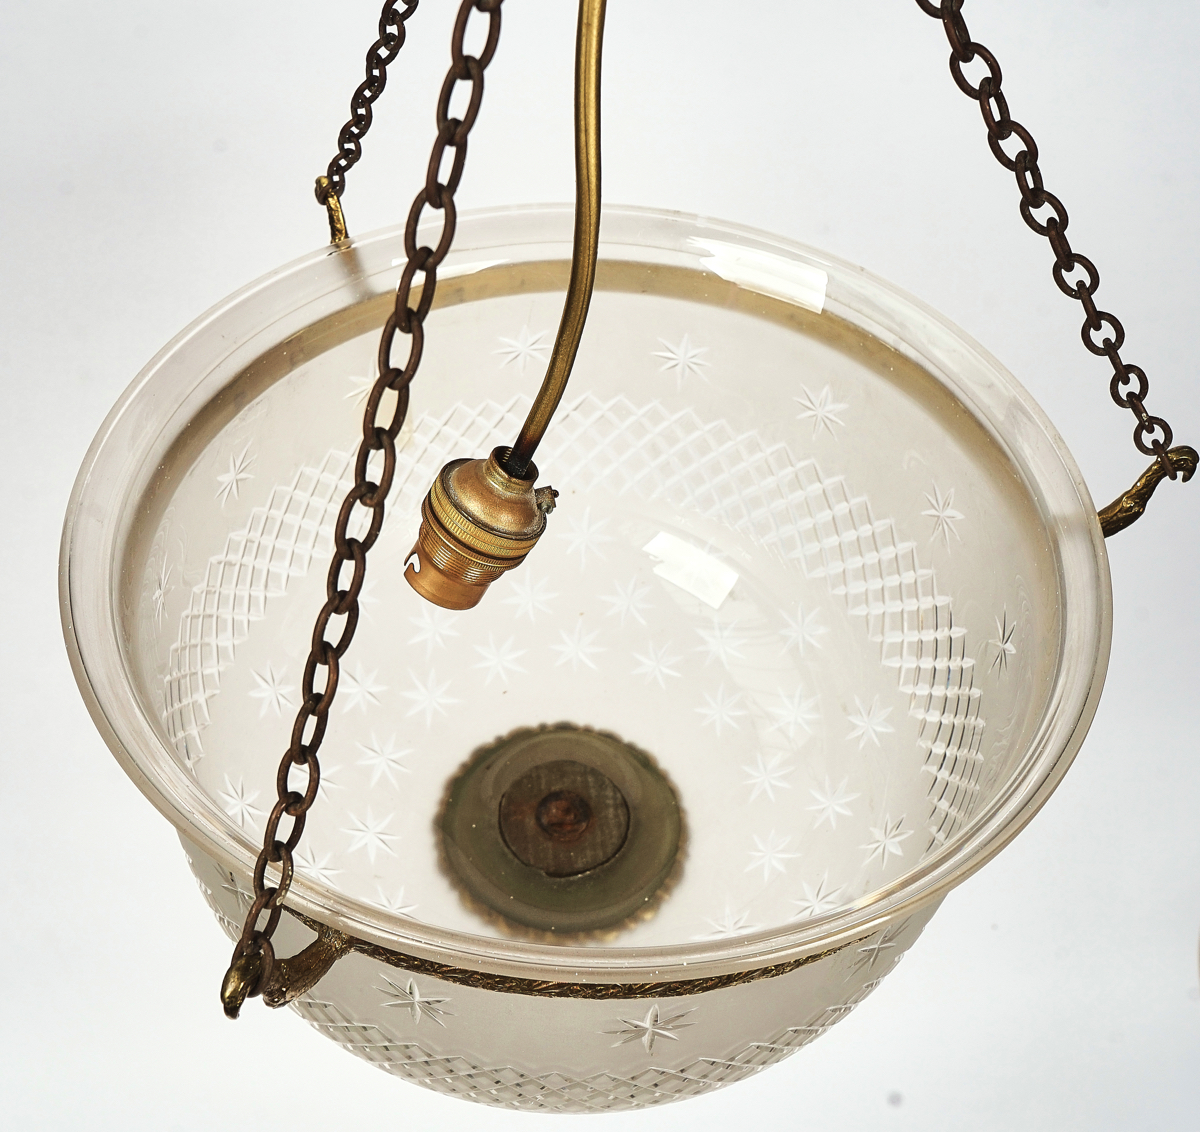 A REGENCY STYLE GILT-BRASS MOUNTED FROSTED GLASS HANGING LIGHT - Image 4 of 4